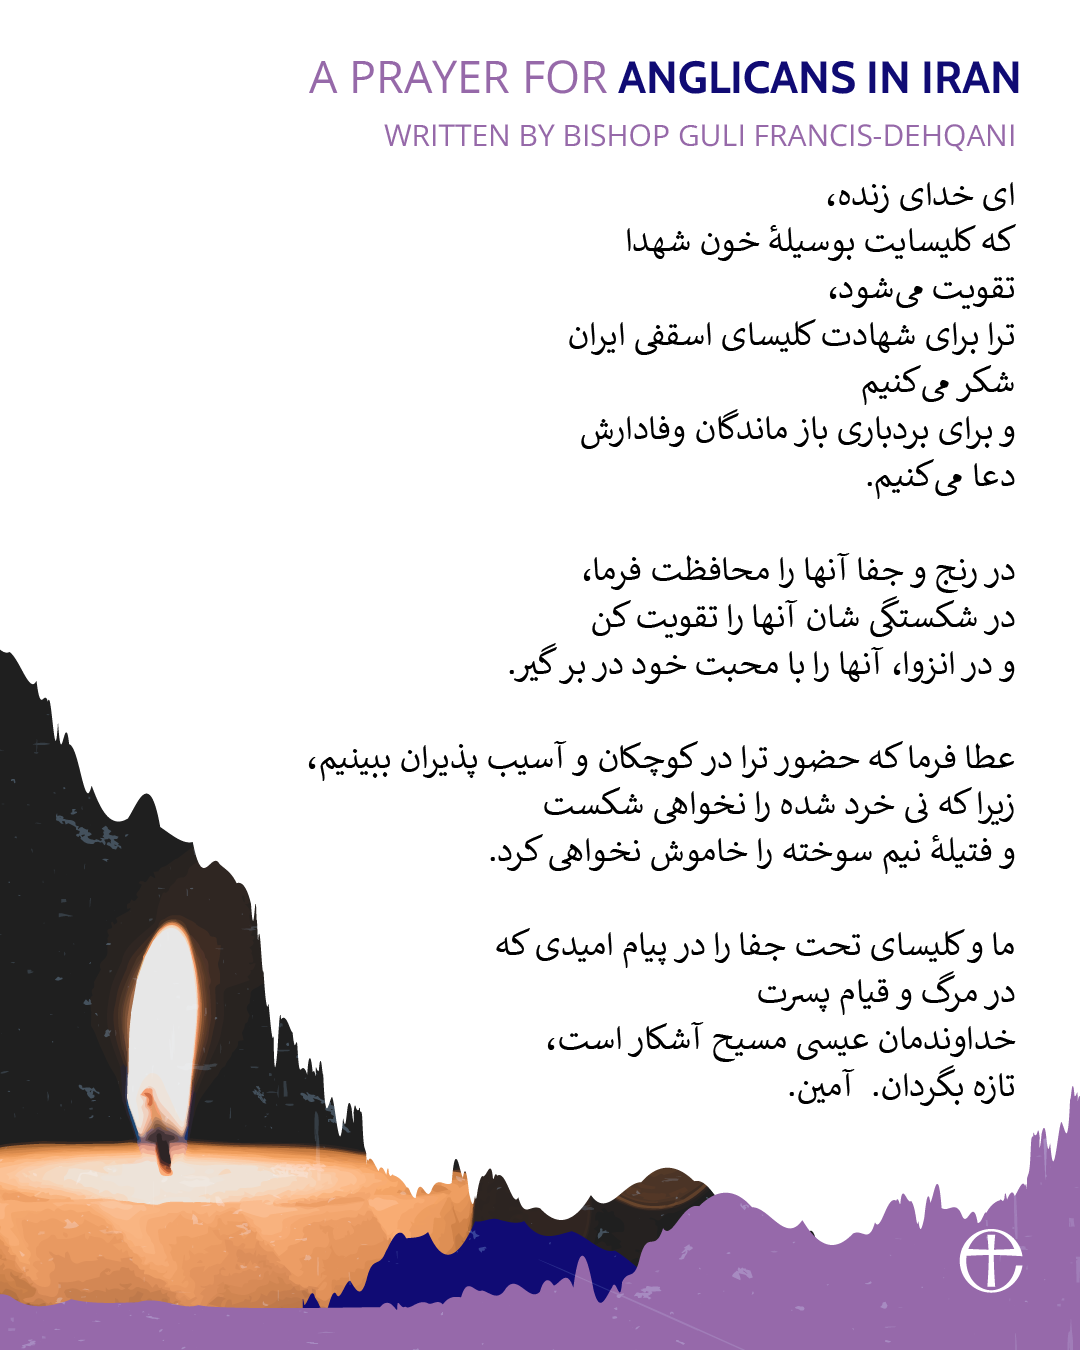 A prayer for Anglicans in Iran in Arabic